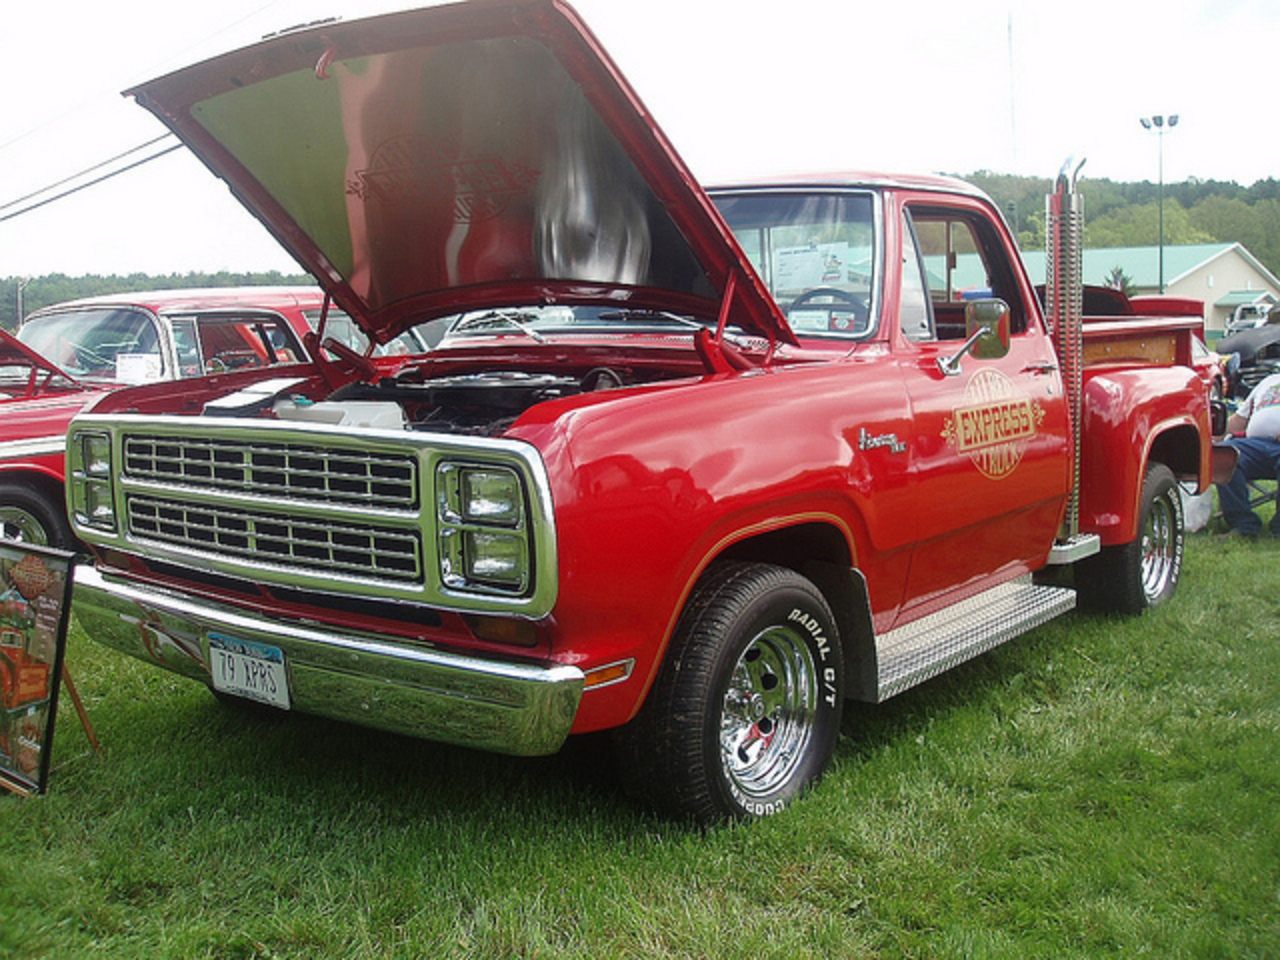 79 Dodge LiL red Express | Flickr - Photo Sharing!